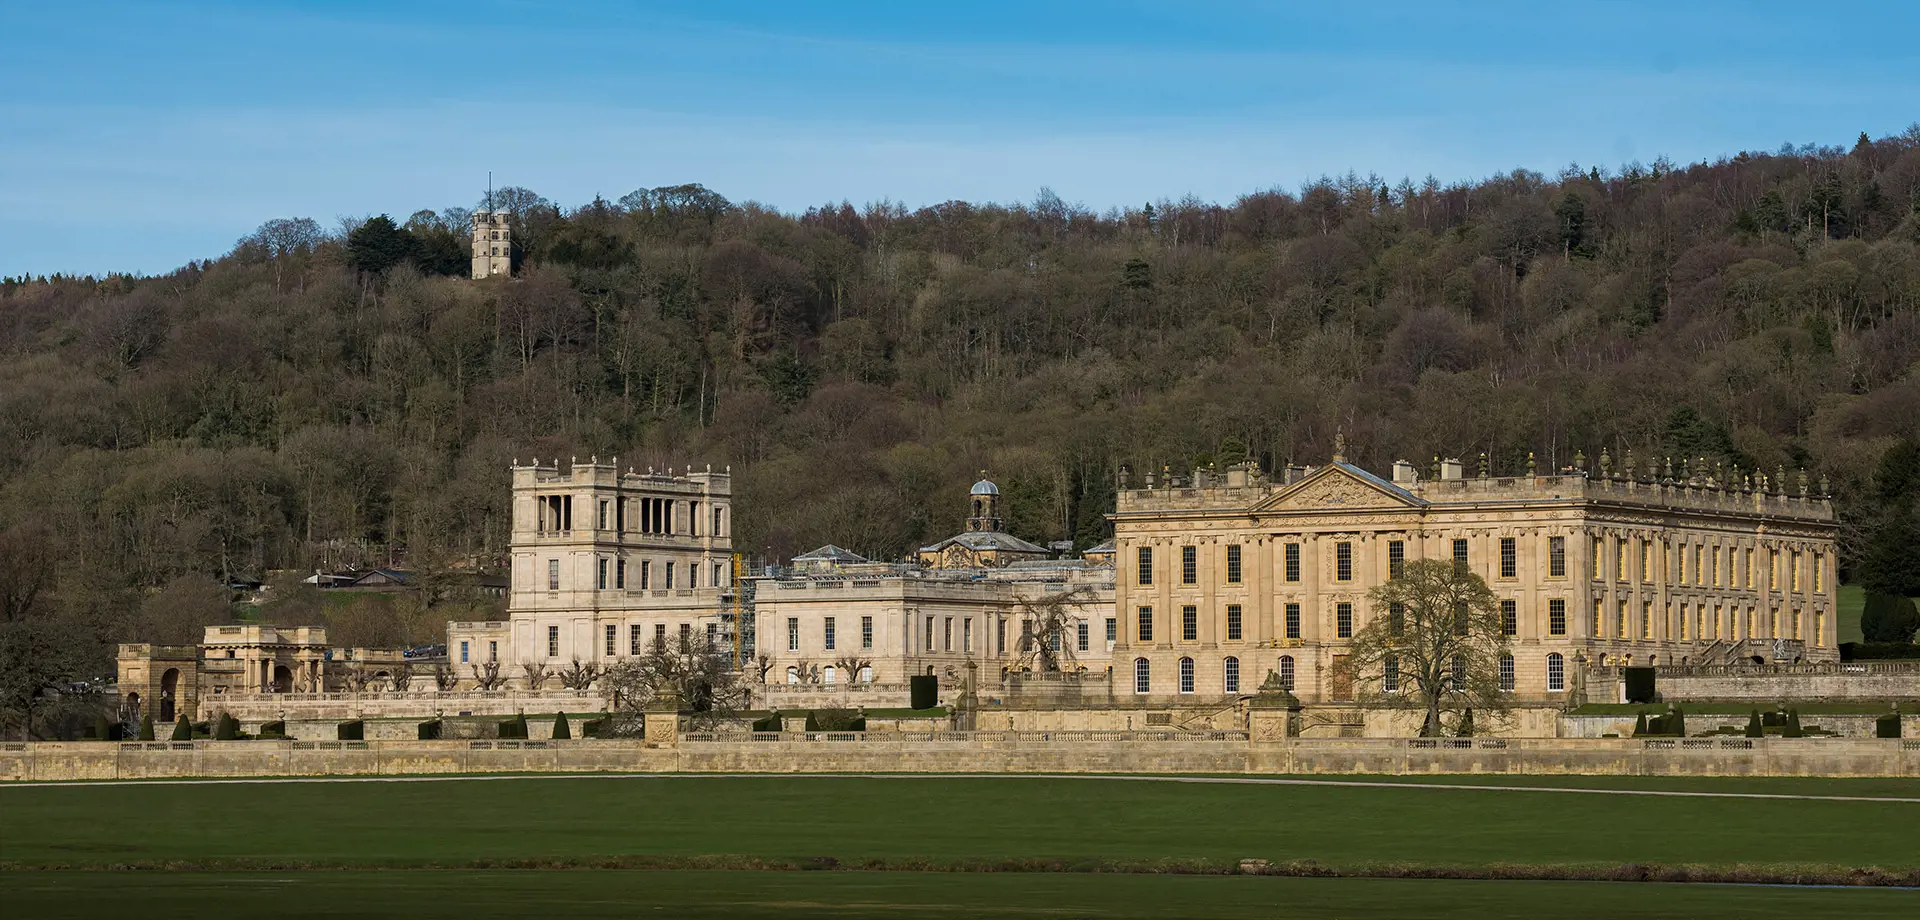 25,000 new trees planted in Stand Wood above Chatsworth